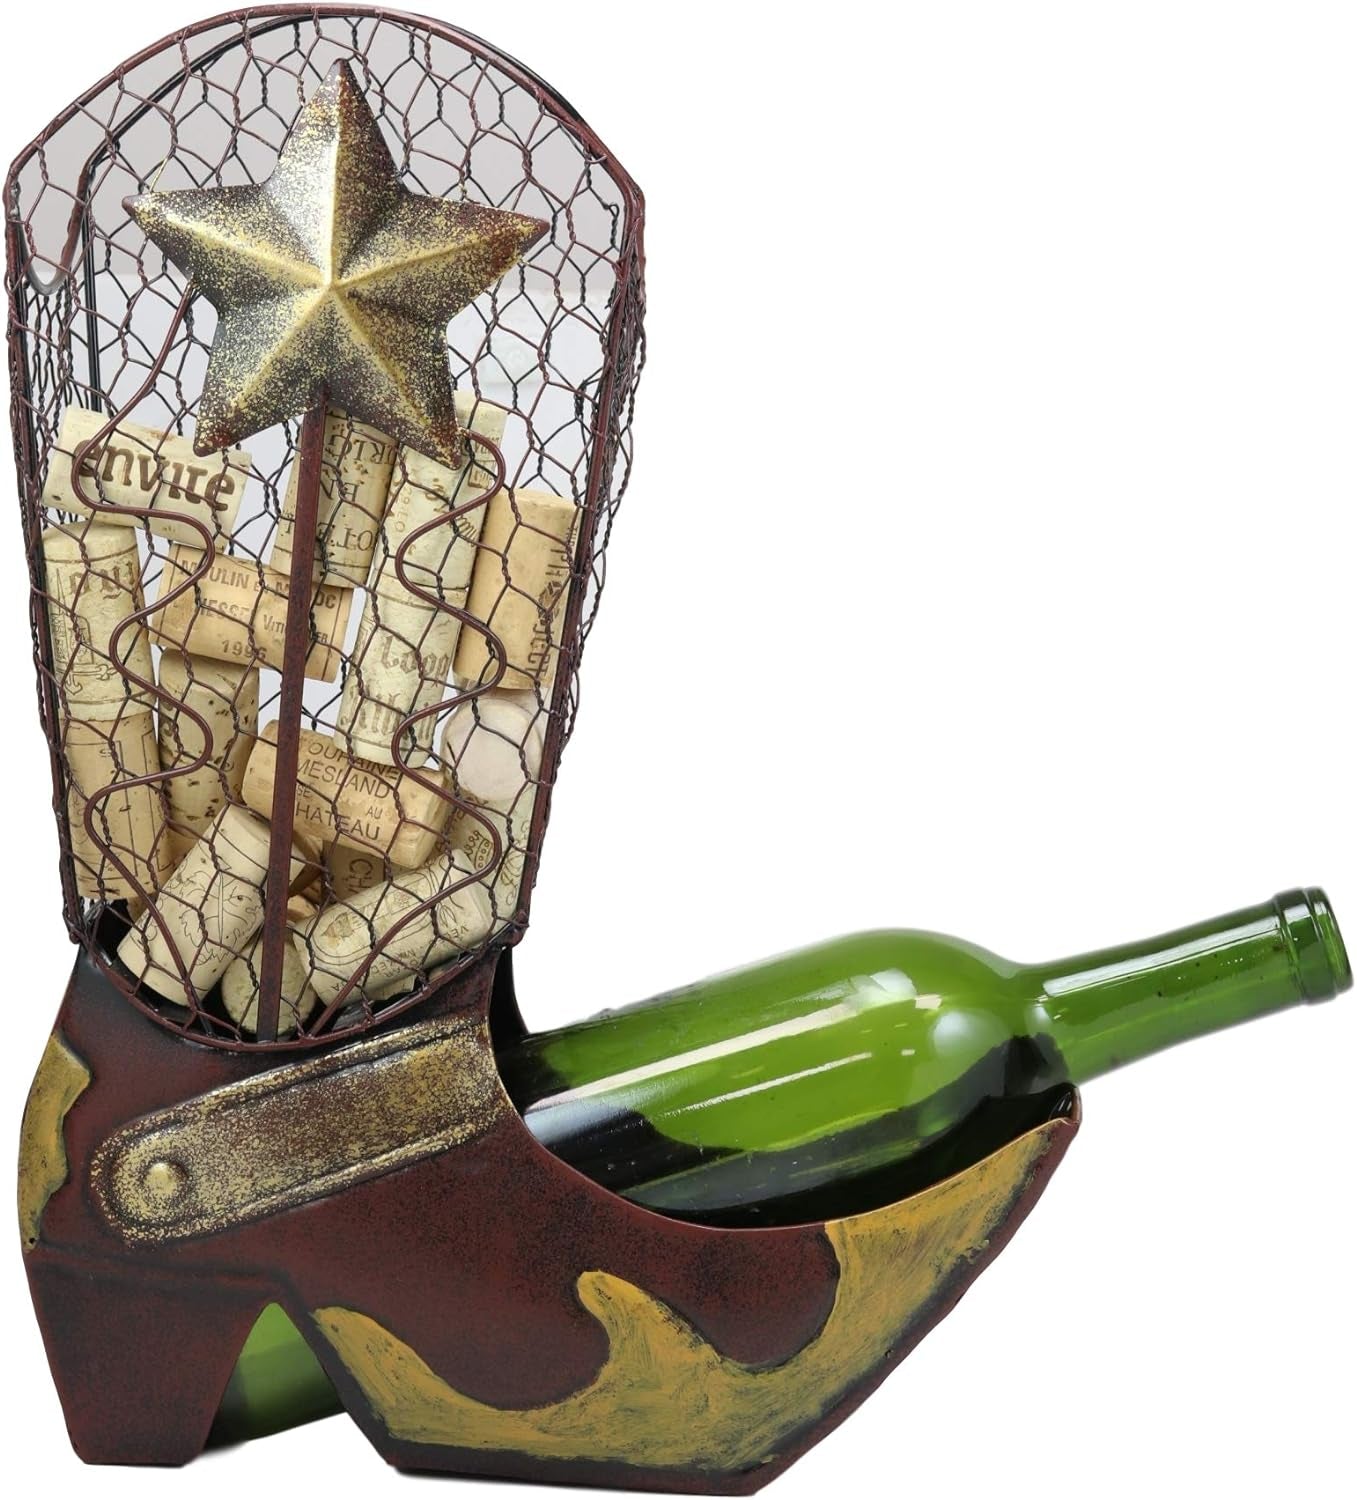 Western Rustic Cowboy Cowgirl Boot with Texas Star Decorative Cork and Wine Bottle Holder Sculpture 14" Tall Hand Made Steel Metal Animated Decor Figurine Kitchen Wine Cellar Organizer